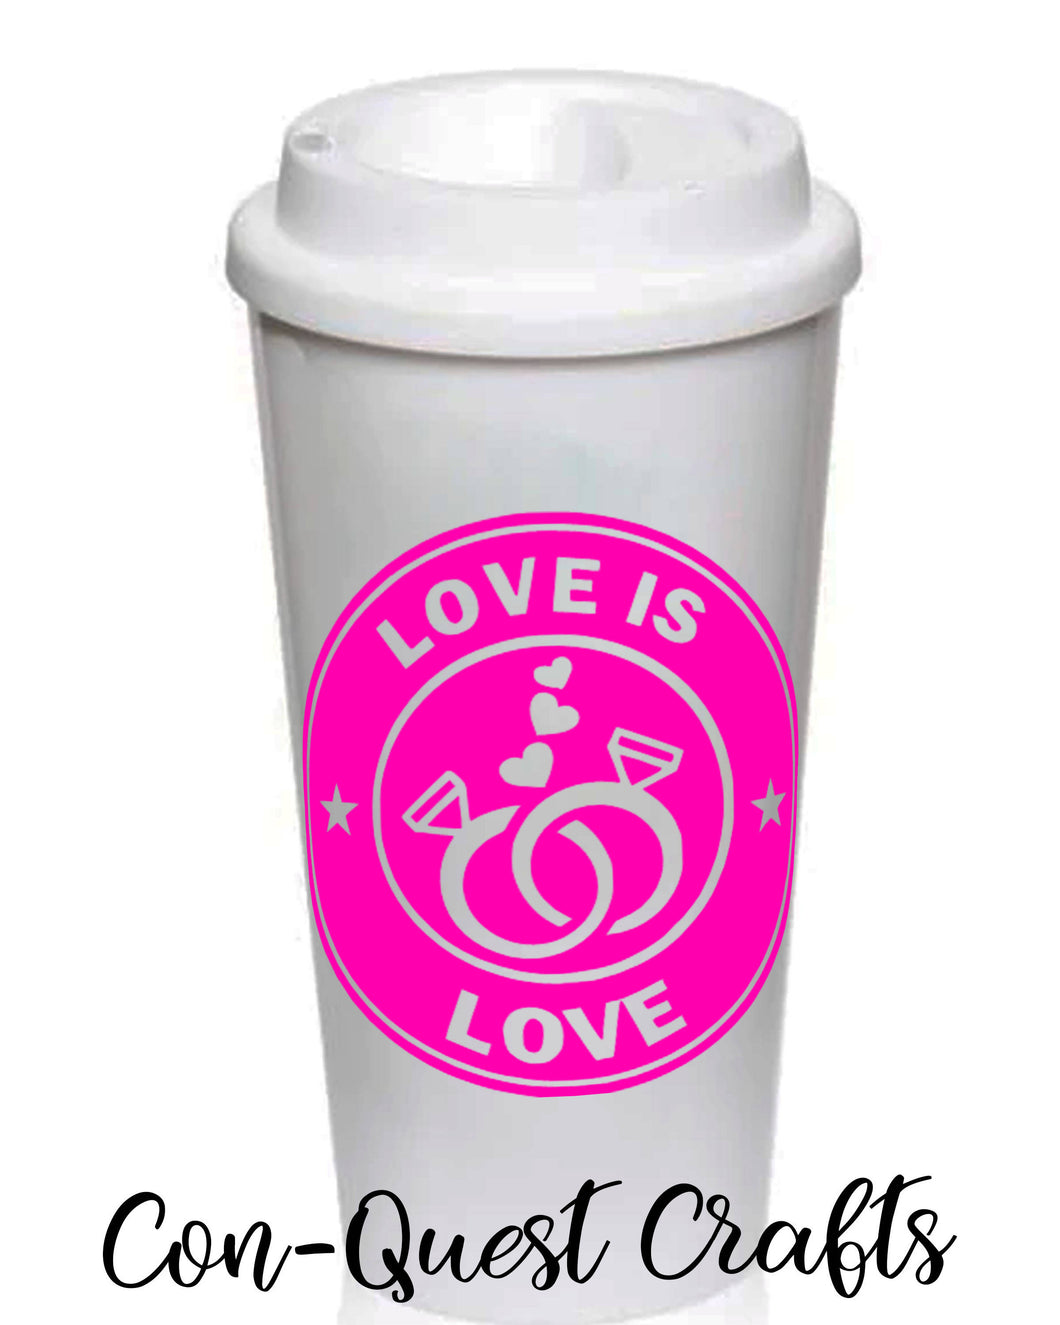 Love is Love Rings Permanent Decals - DECAL ONLY